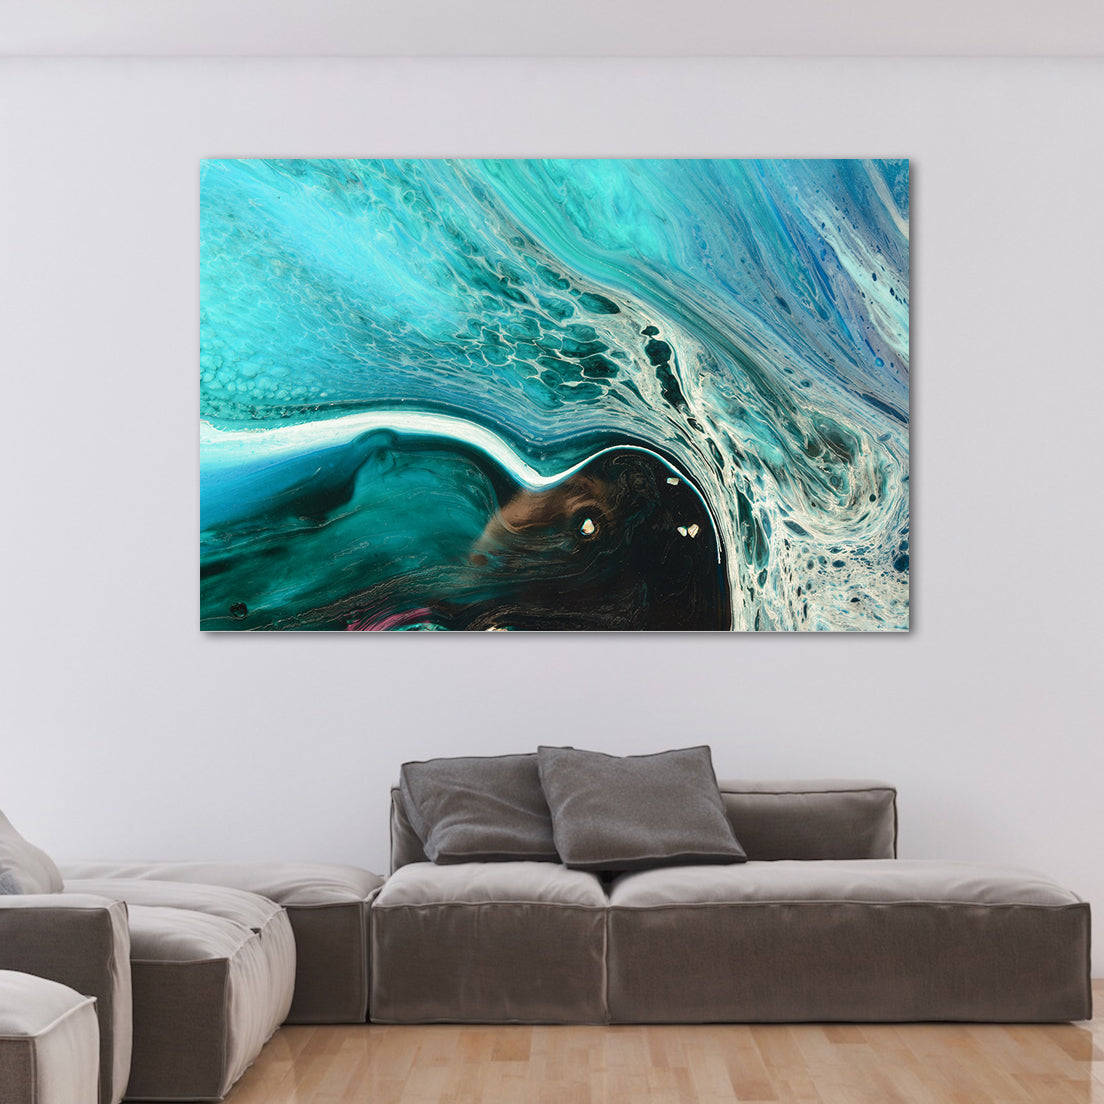 Abstract Seascape. Rise Above Inlet 2 Tropical. Art Print. Antuanelle Tropical Artwork. Limited Edition Print